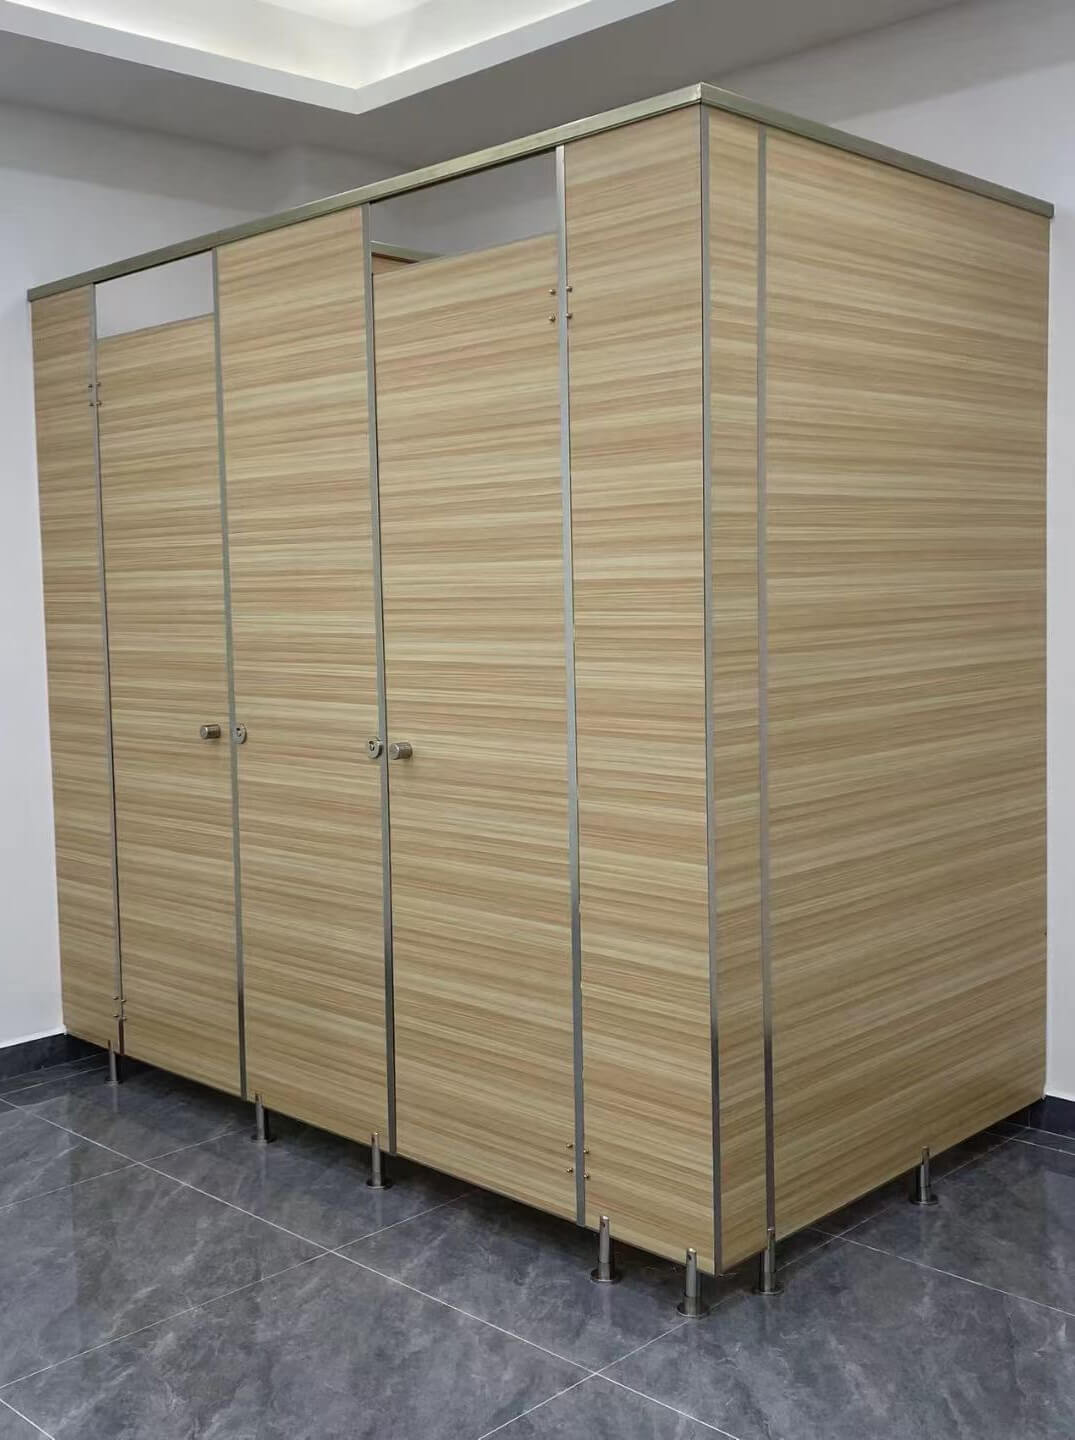 A variety of bathroom cubicles and toilet partition with good weather resistance